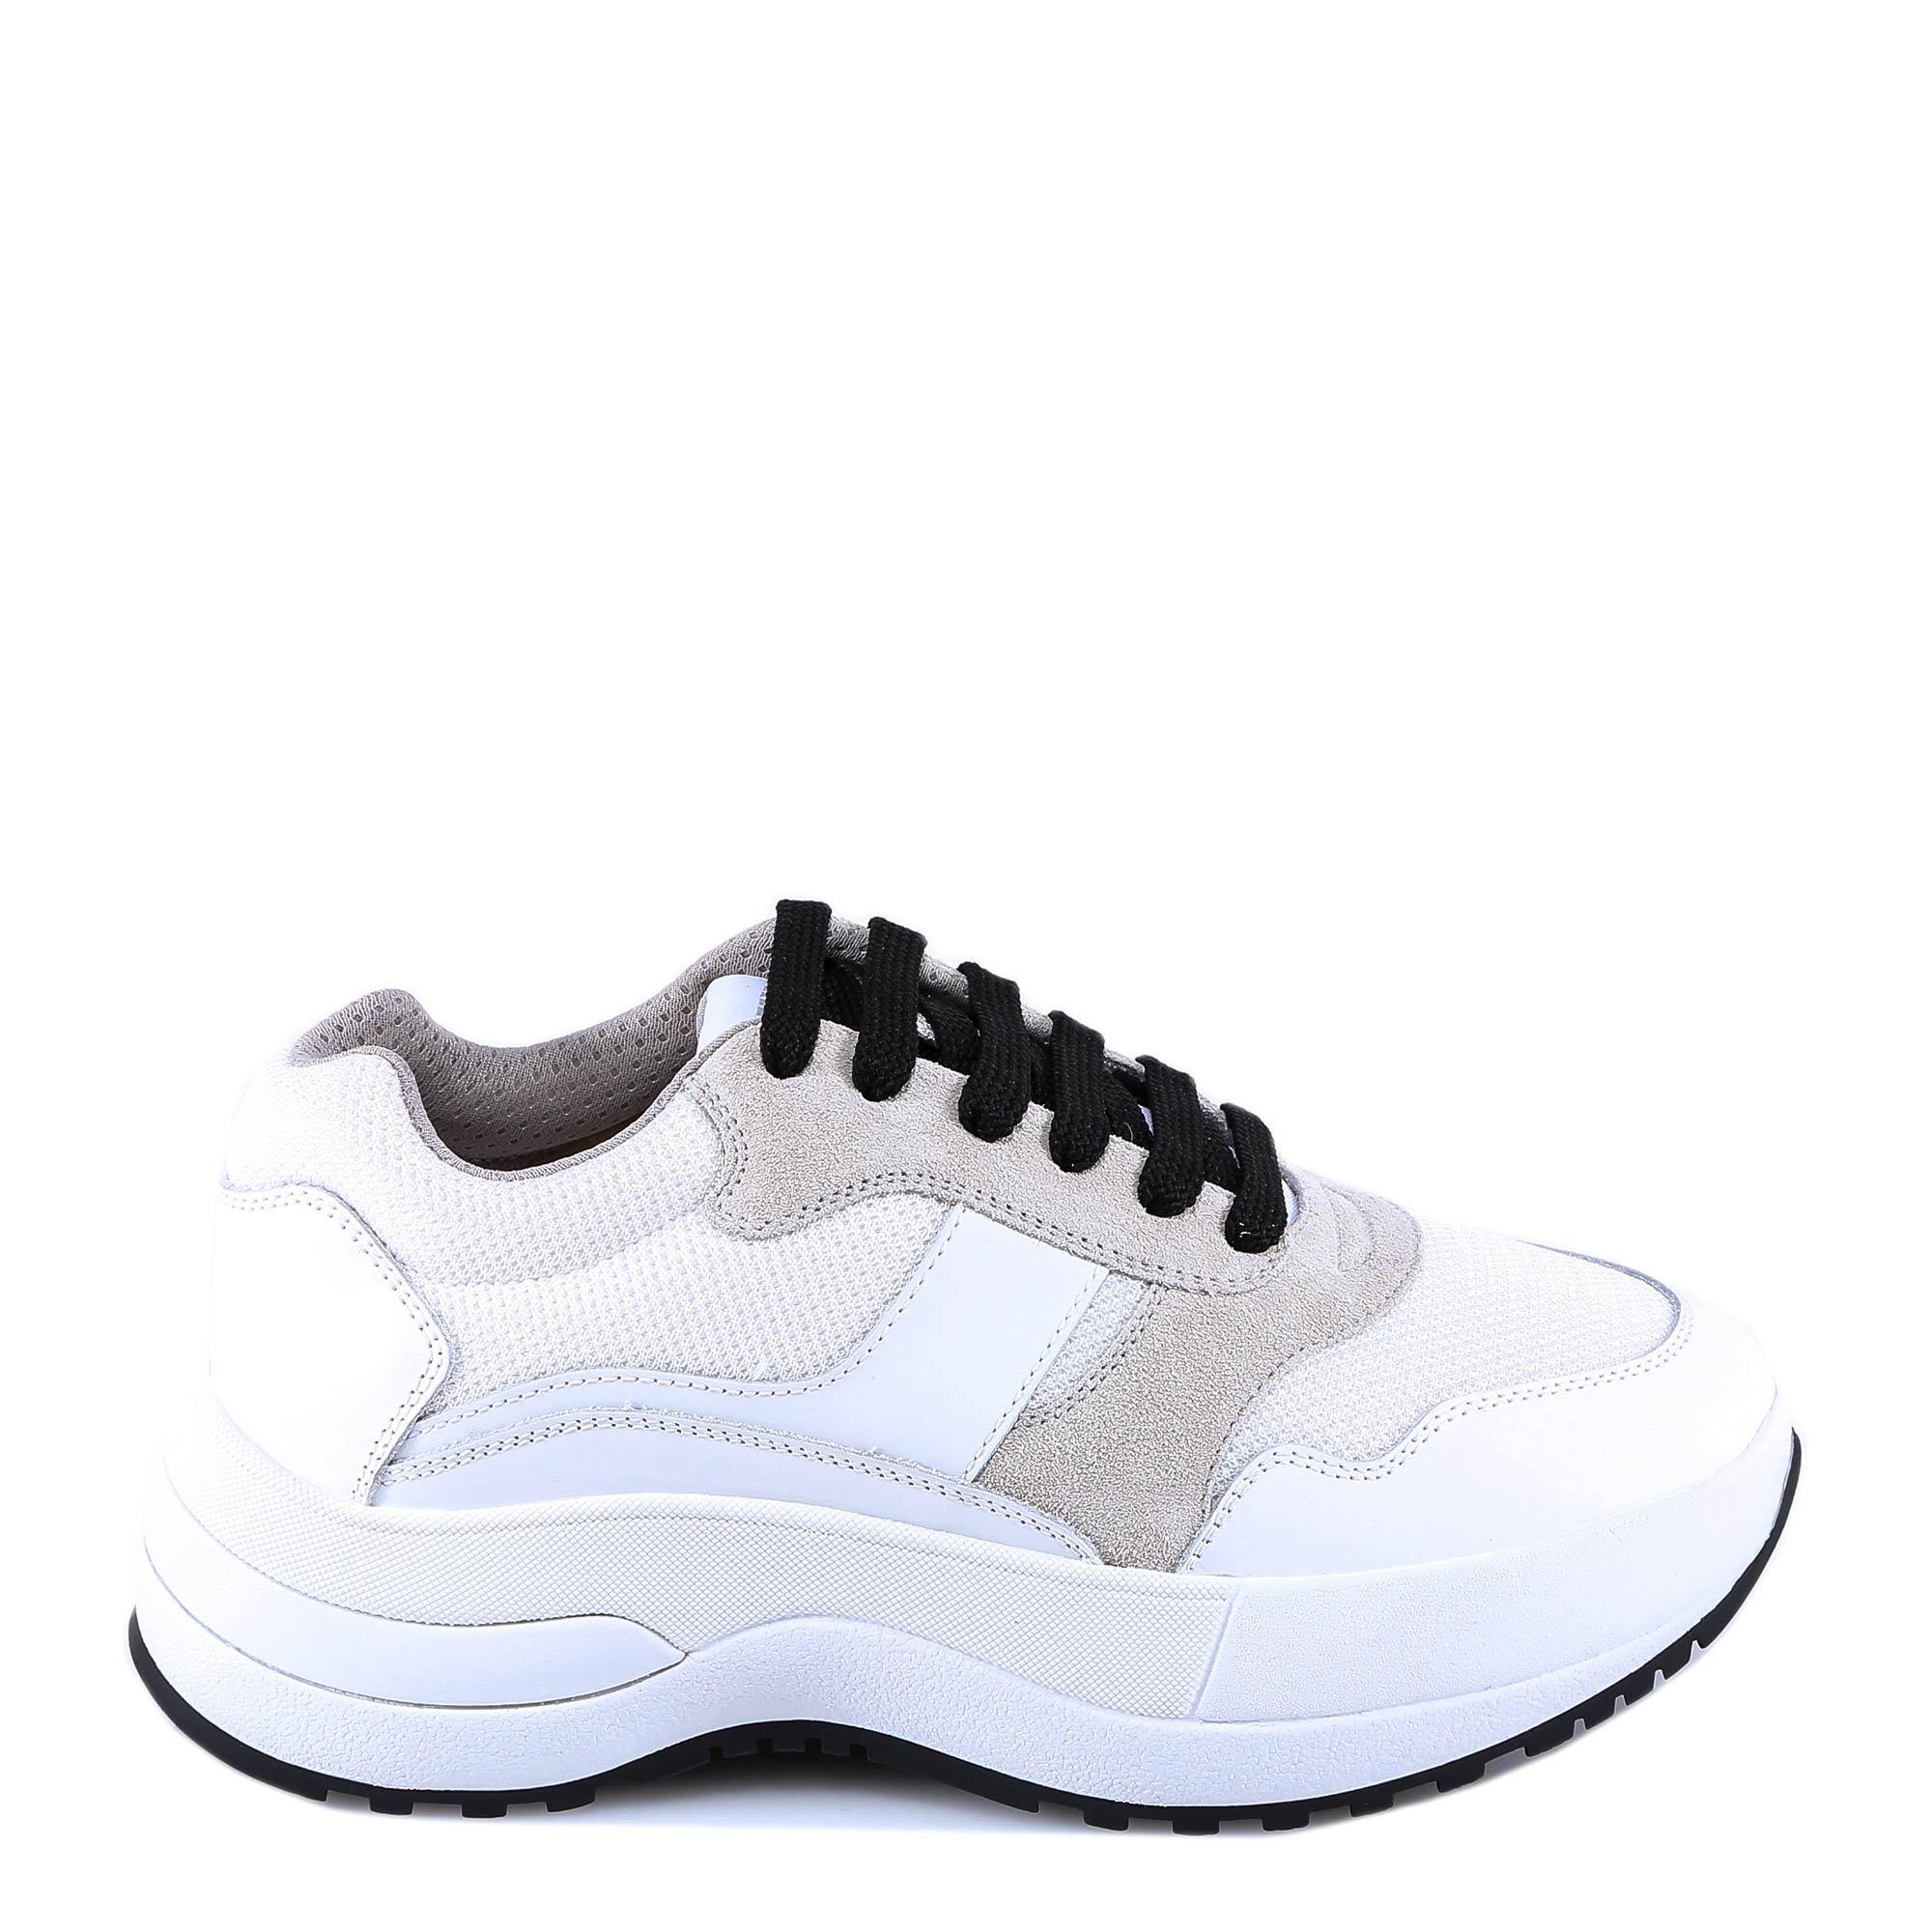 Celine Delivery Running Sneakers in White | Lyst